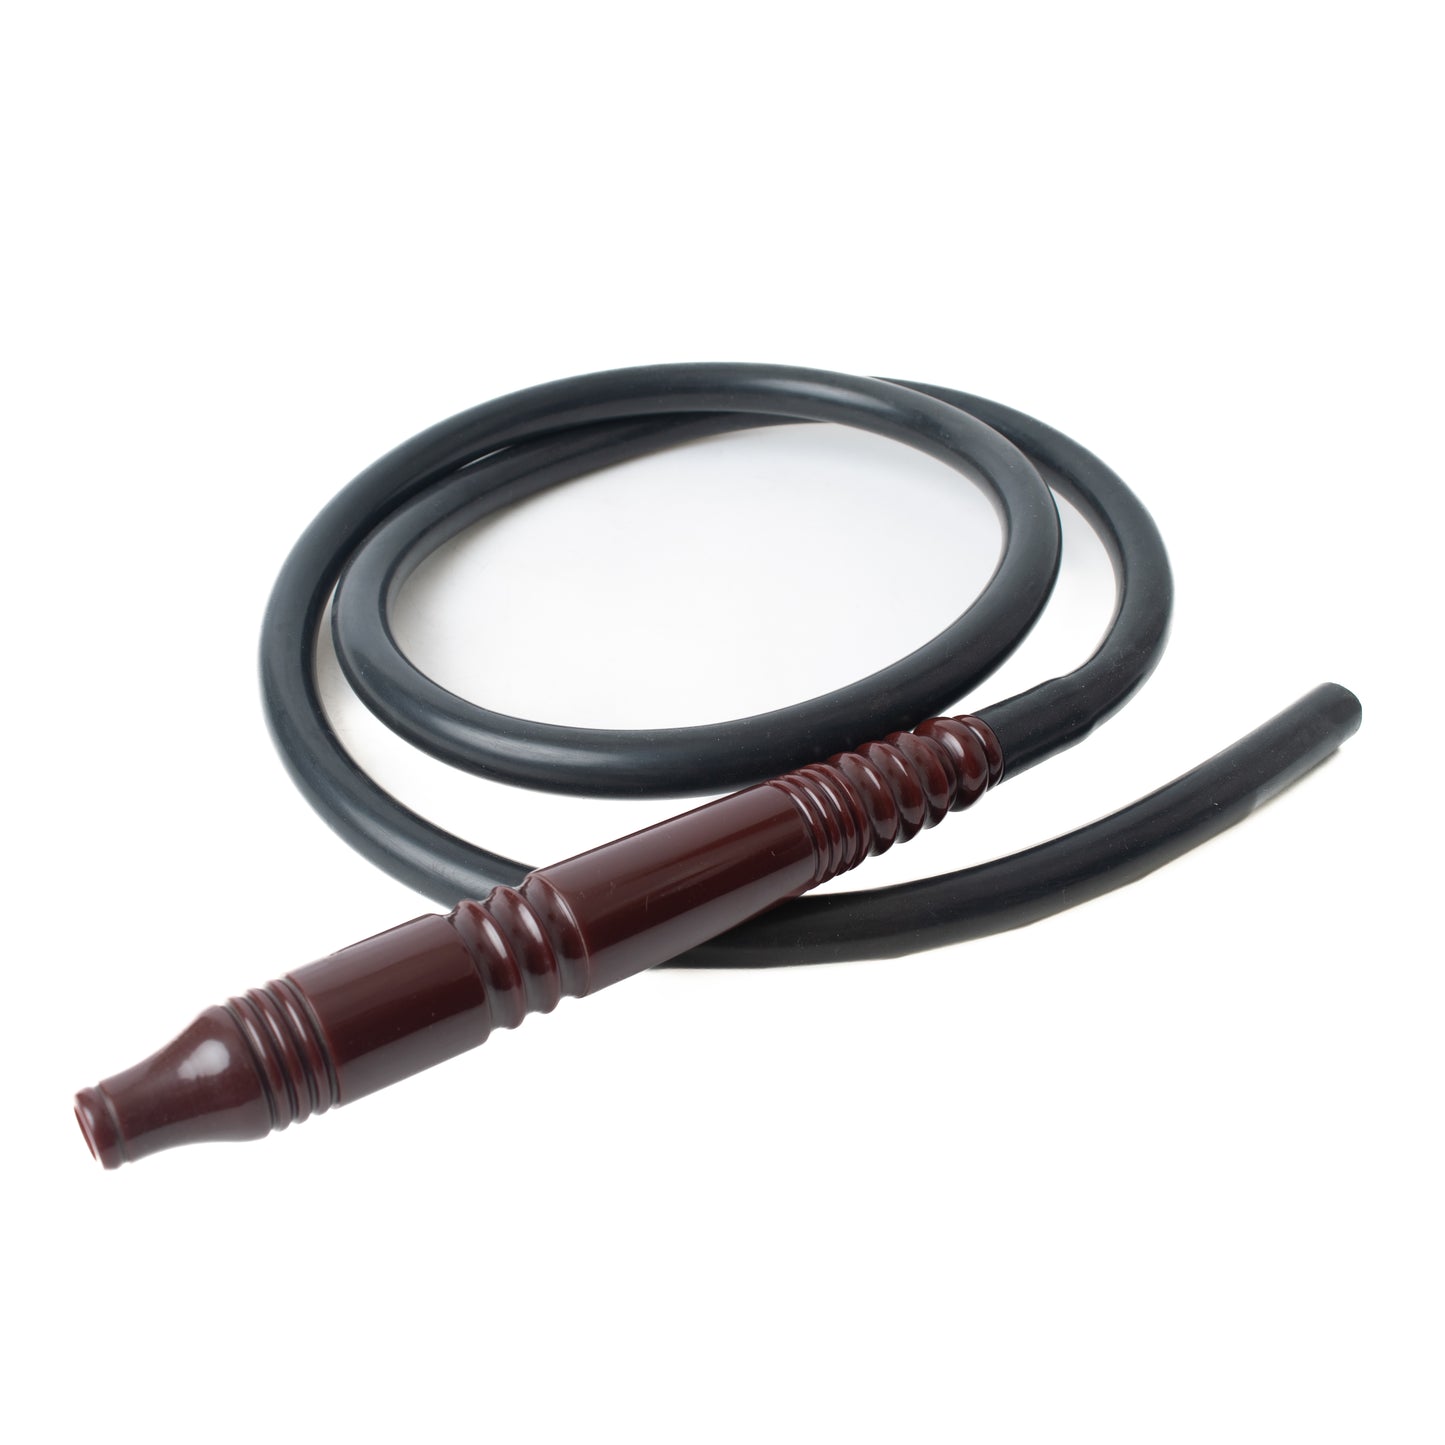 Silicone Pipe for Hookah - Black (Brown Handle)